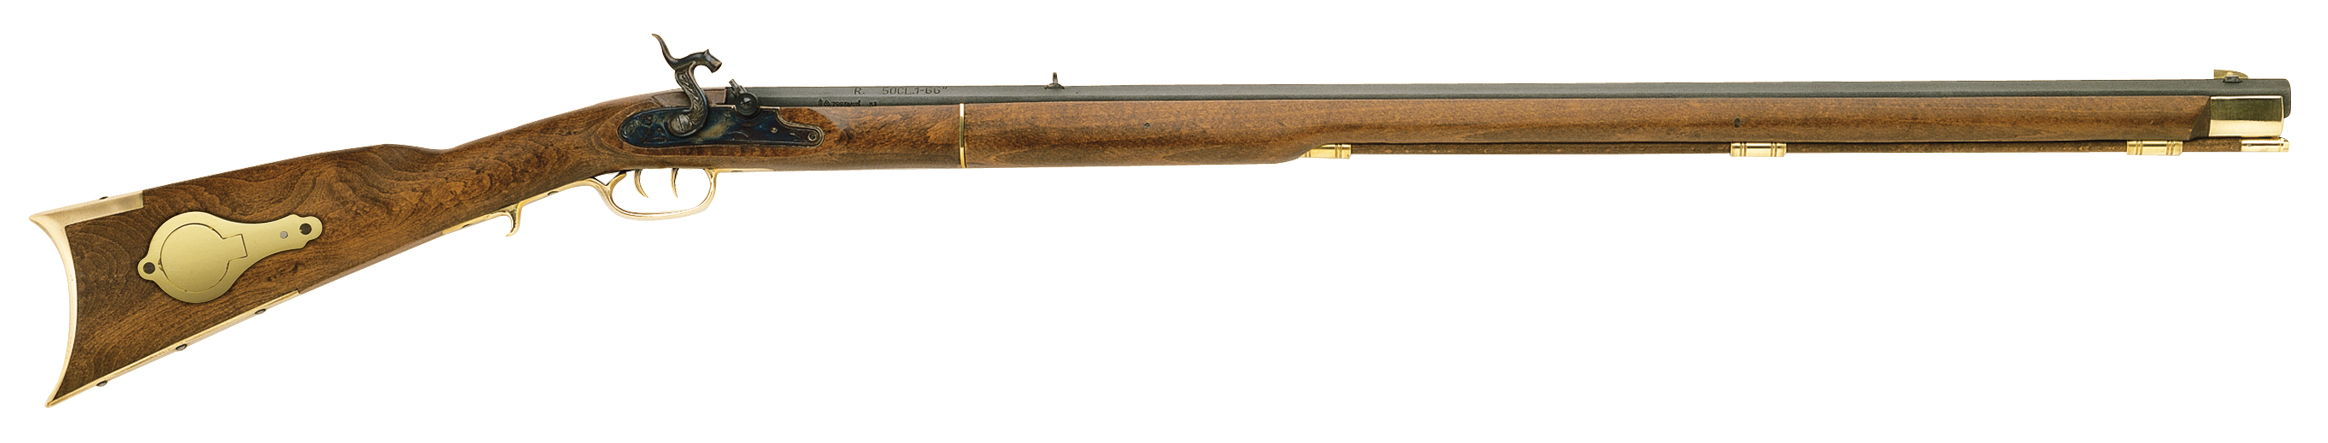 Deluxe Kentucky Rifle .50 cal Percussion Select Hardwood/Blued R2040